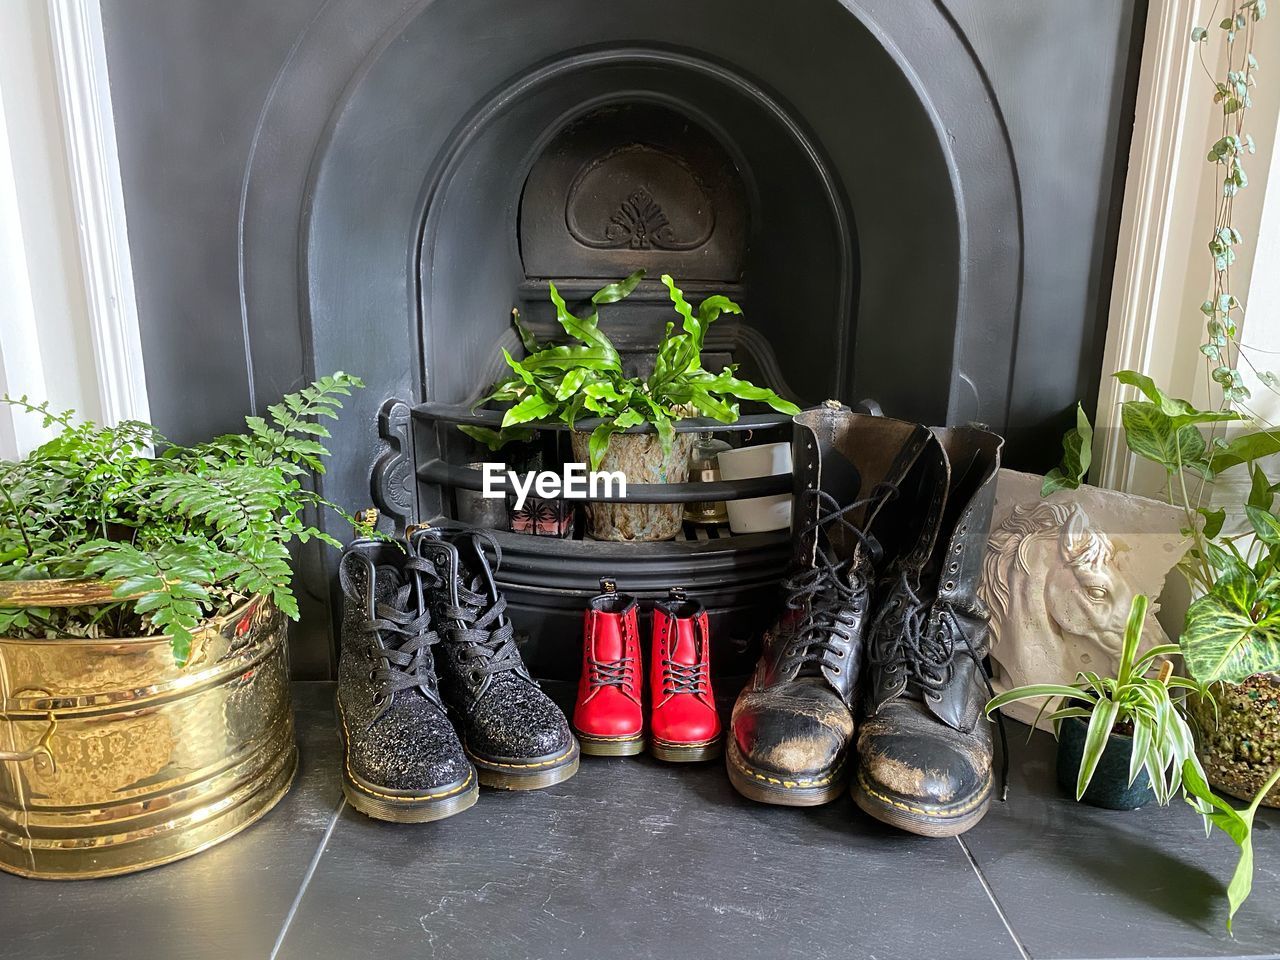 Close-up of potted plants in front of fireplace and dr marten boots. pregnancy announcement.